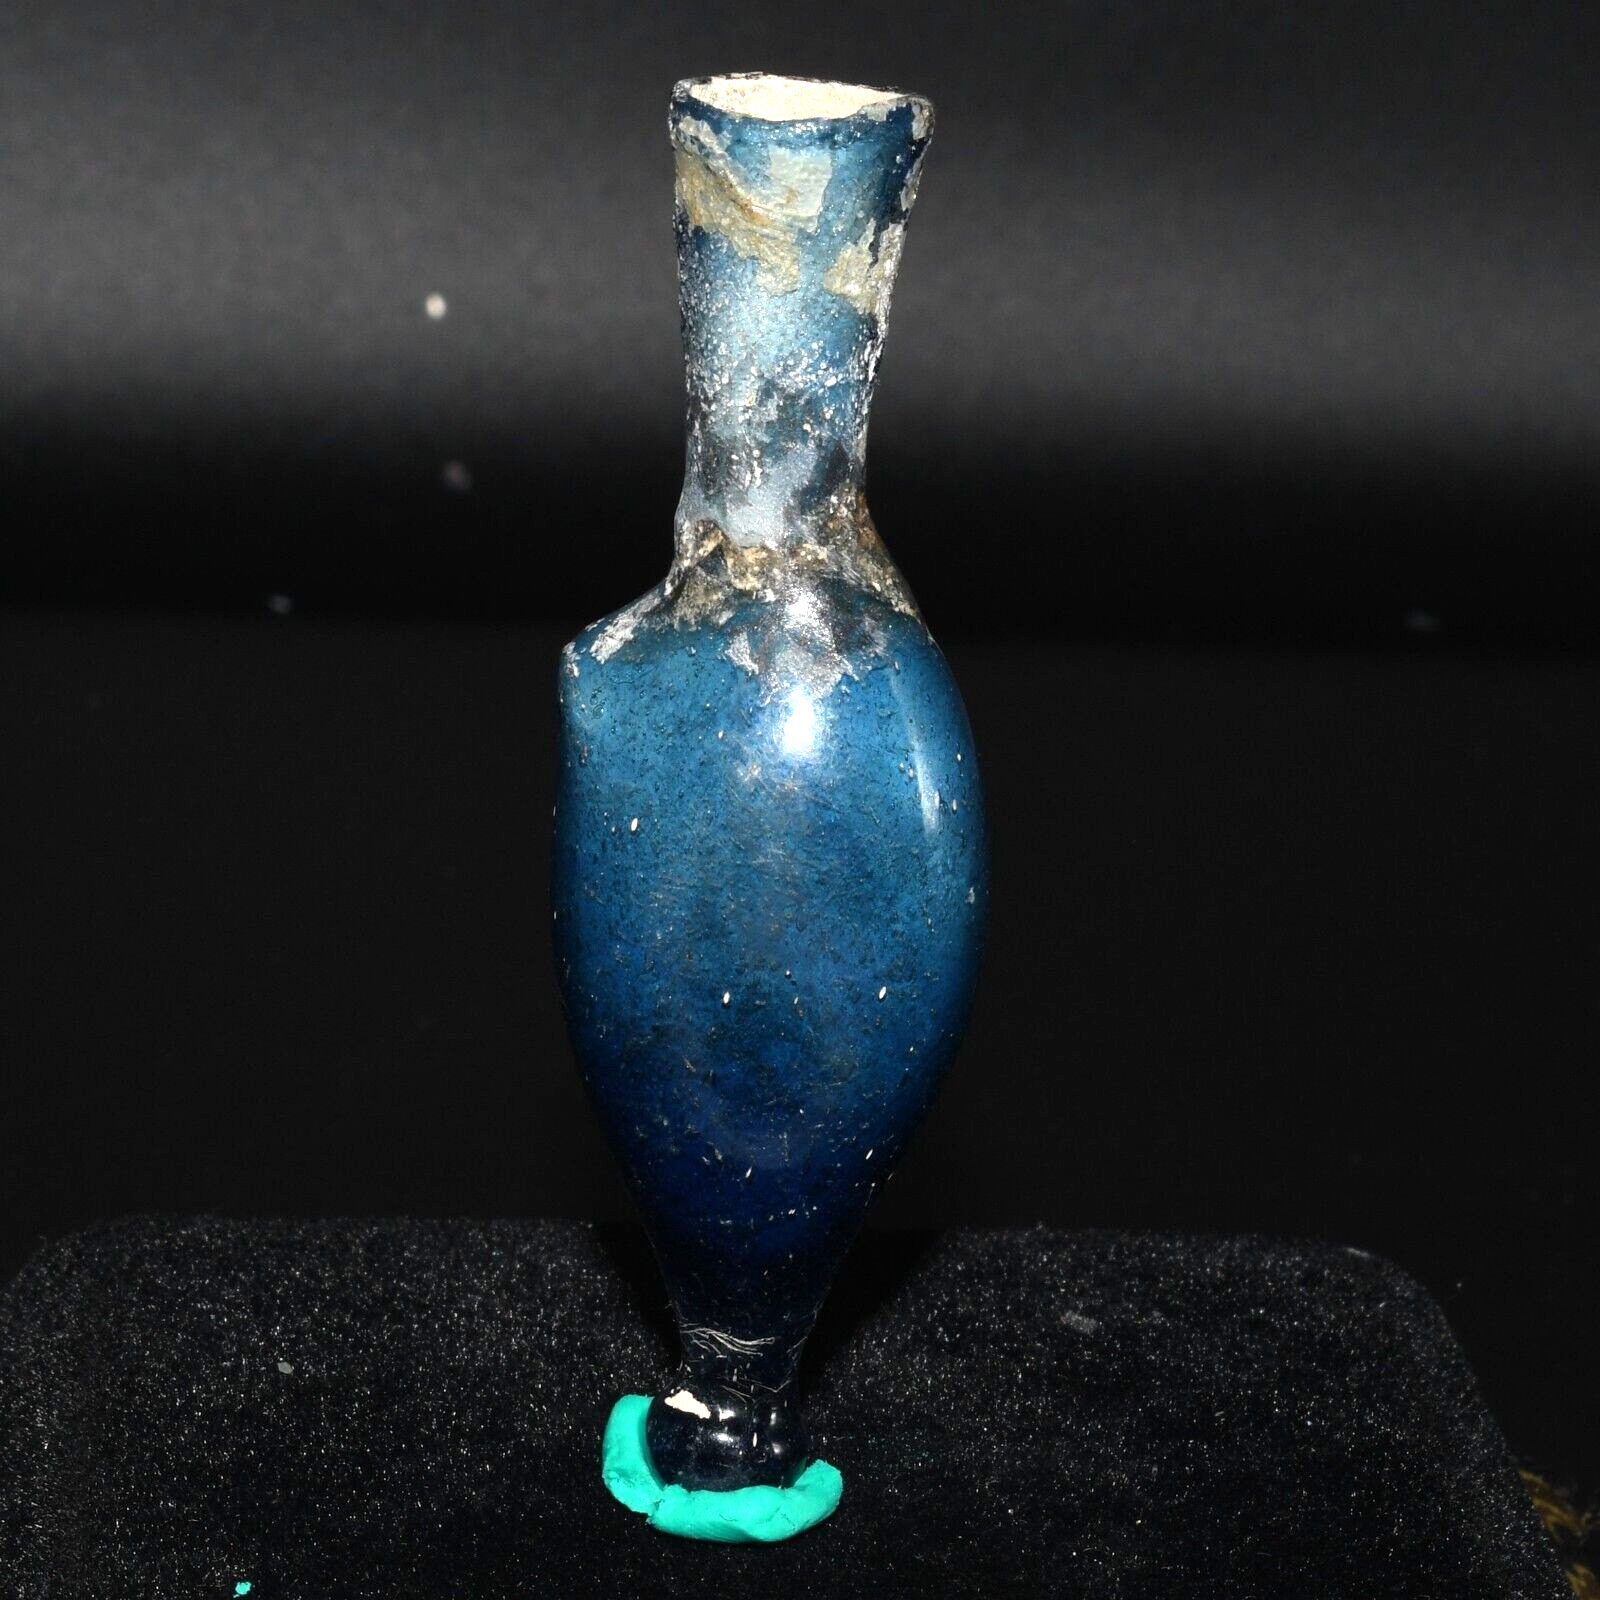 Genuine Ancient Roman Glass Vial Bottle with Blue Patina C. 1st - 2nd Century AD